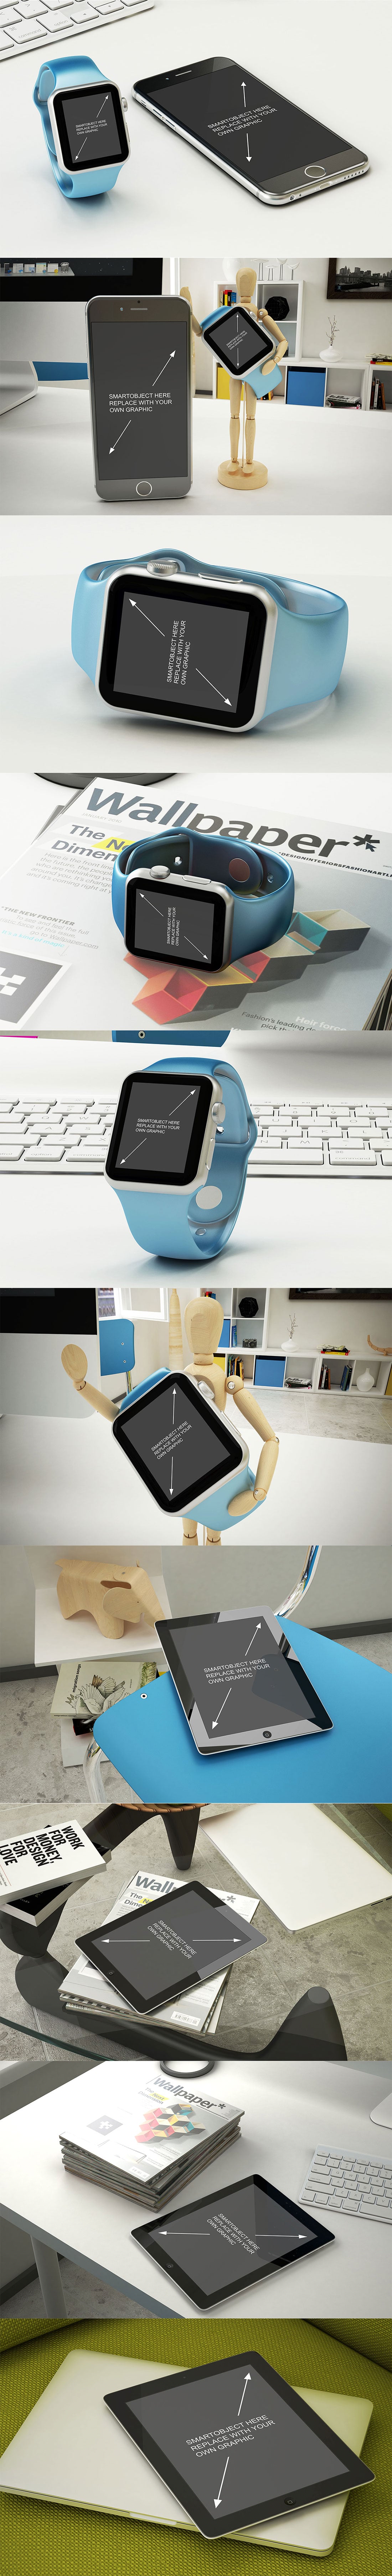 Apple watch with blue strap and ipad.